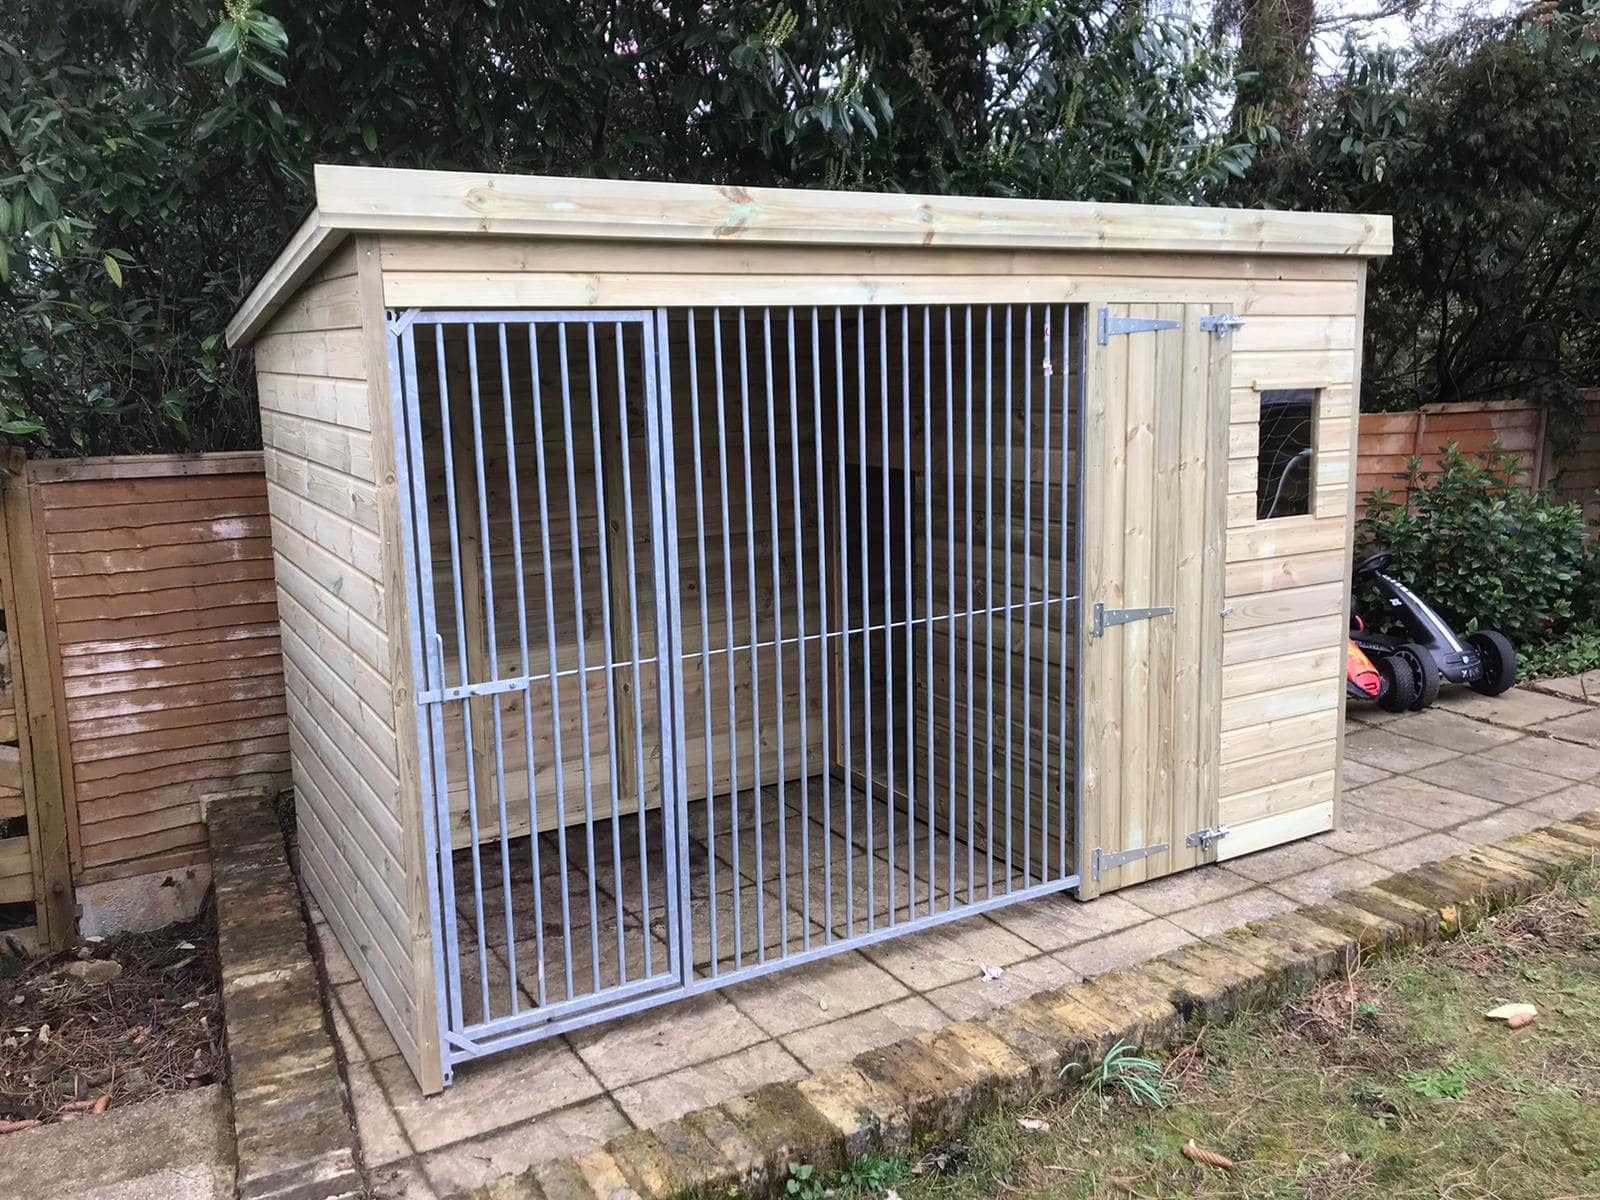 Stapeley Wooden Dog Kennel And Run 14ft (wide) x 4ft (deep) x 6'6ft (high)